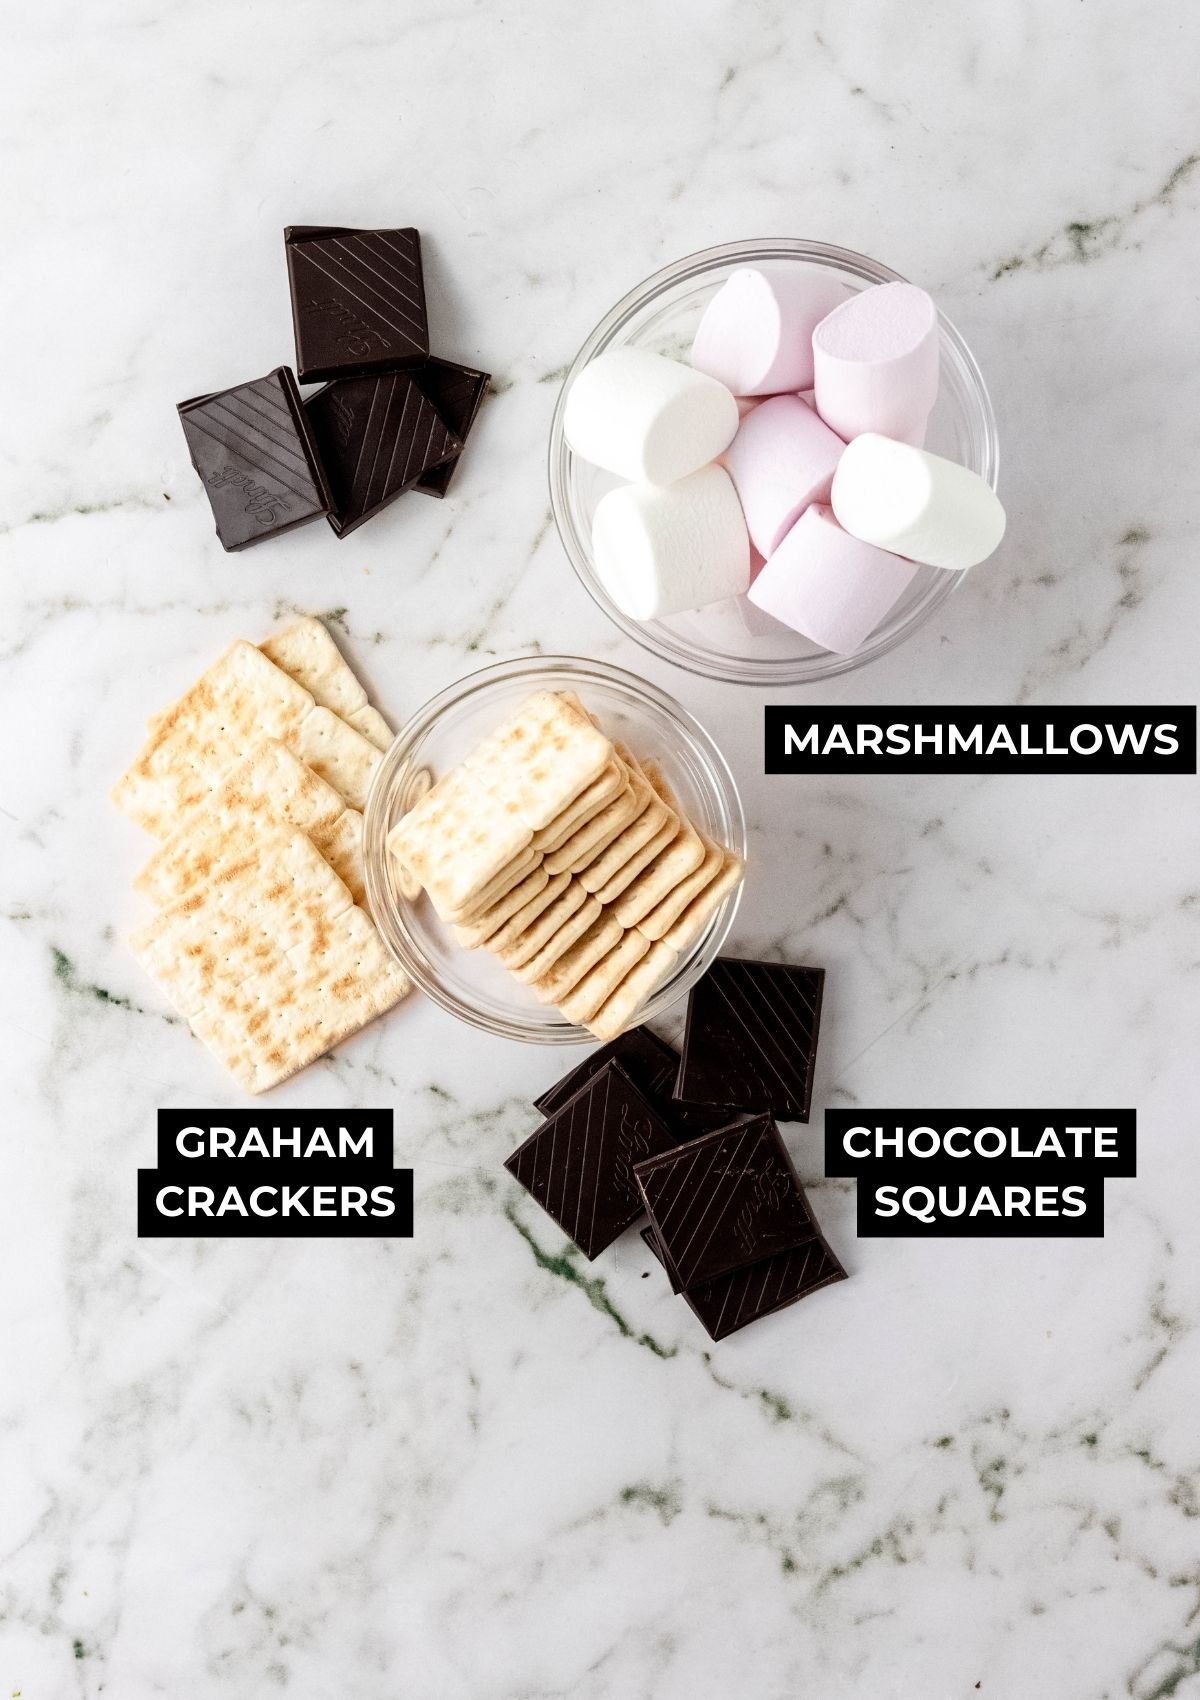 Ingredients for smores.